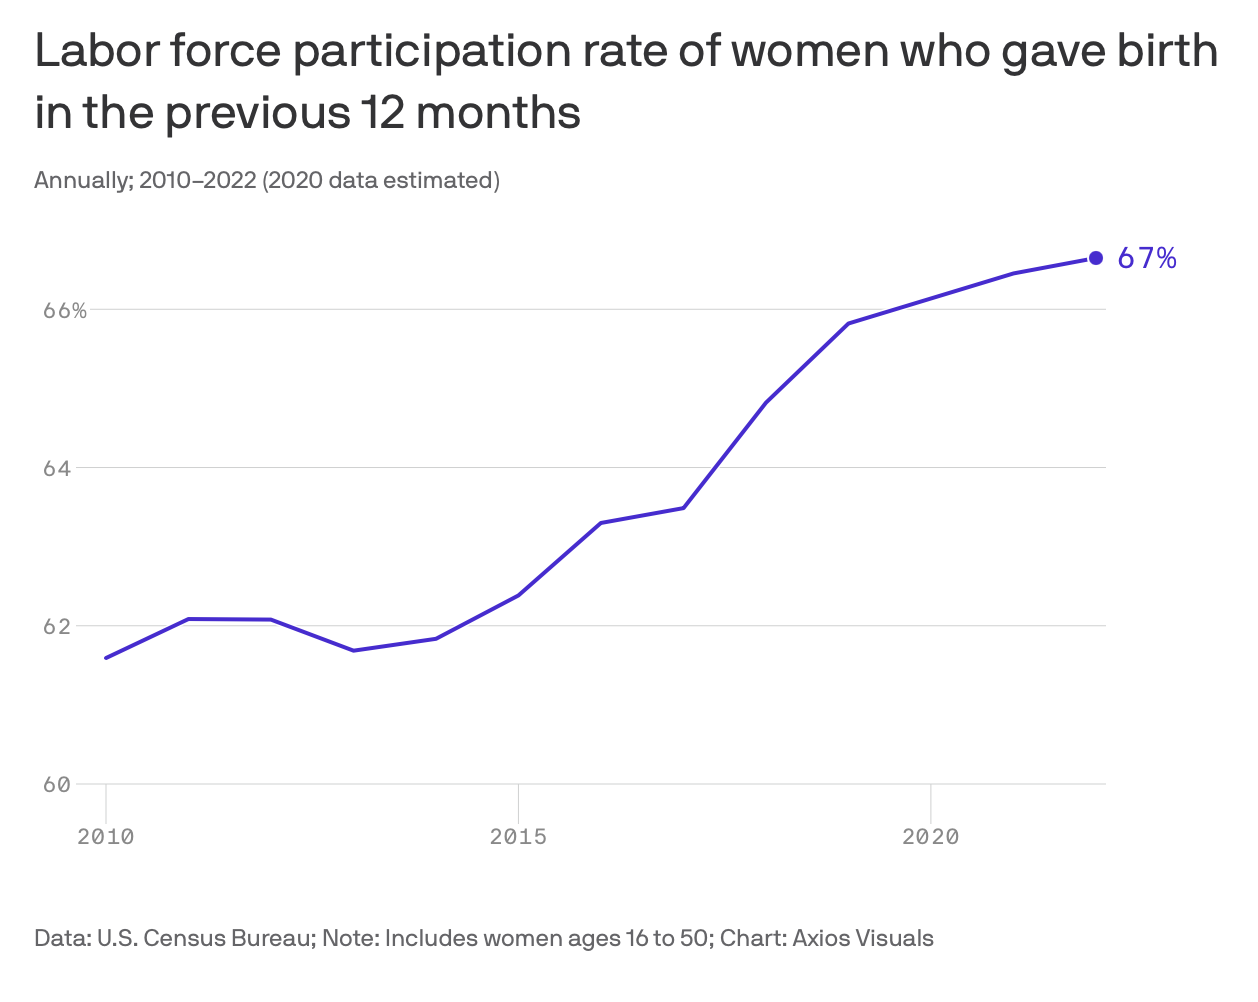 Labor force participation rate of women who gave birth in the previous 12 months